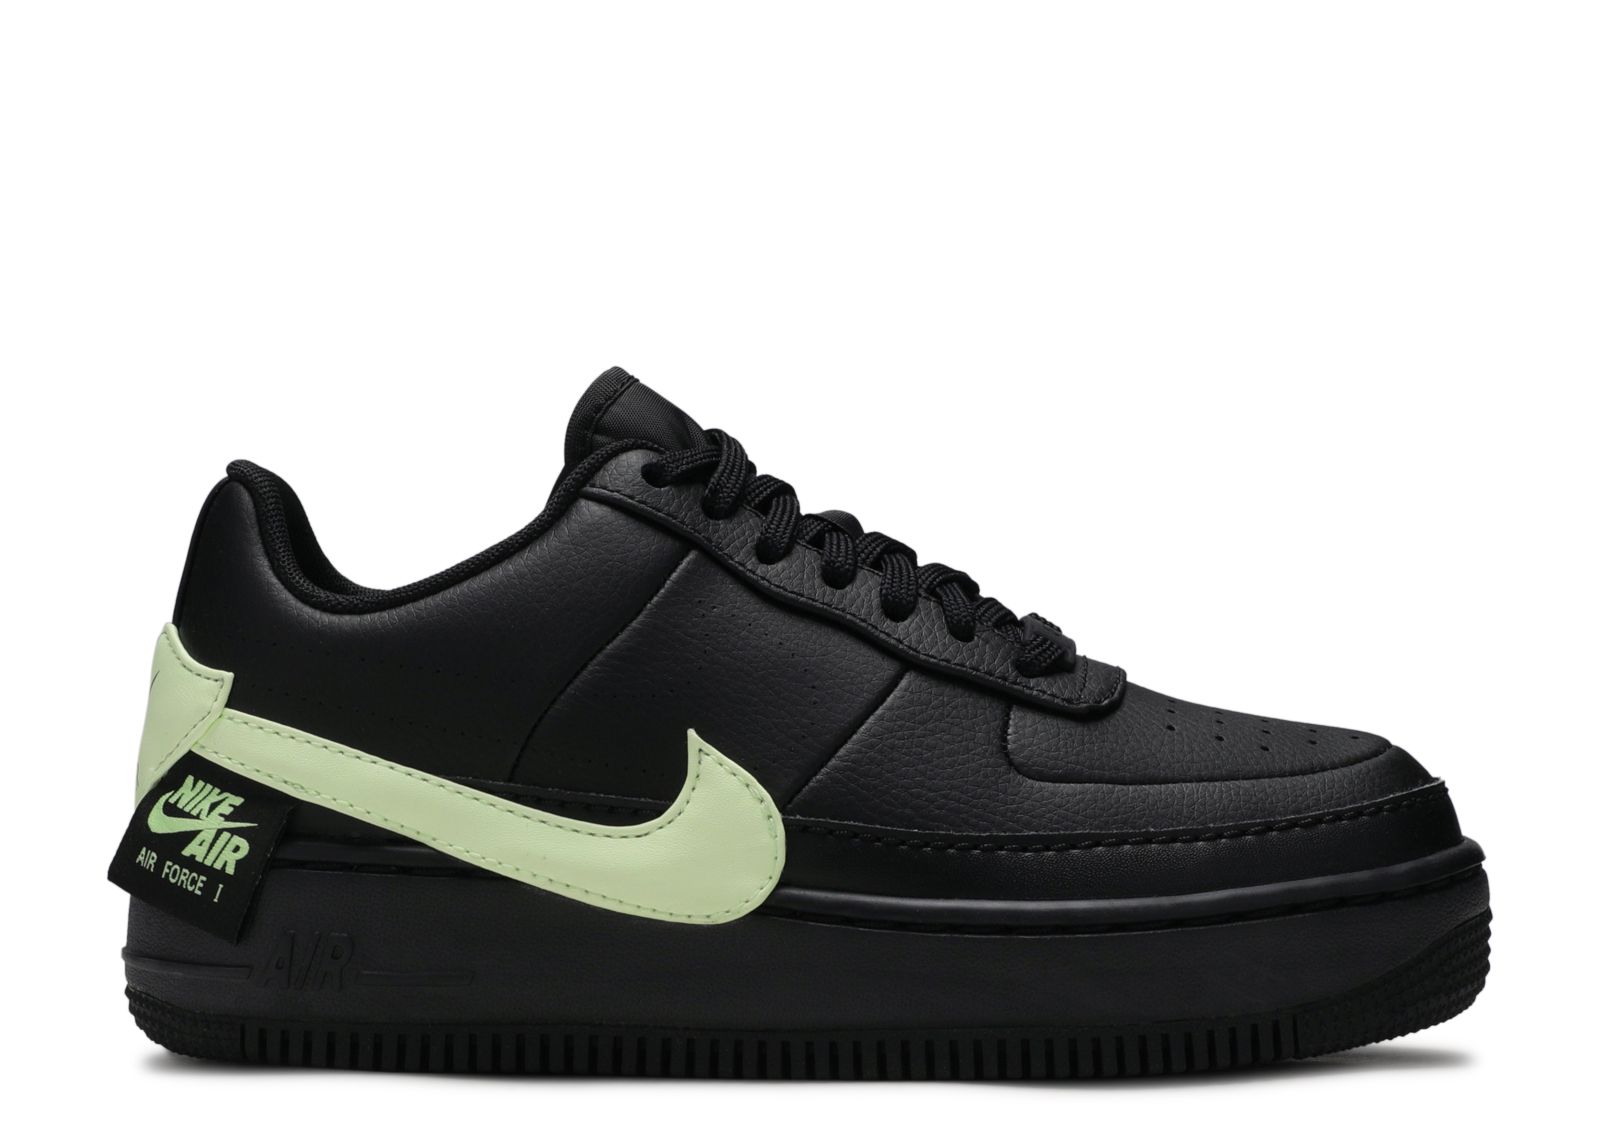 Wmns Air Force 1 Jester XX 'Black Barely Volt' - Nike - CN0139 001 ...